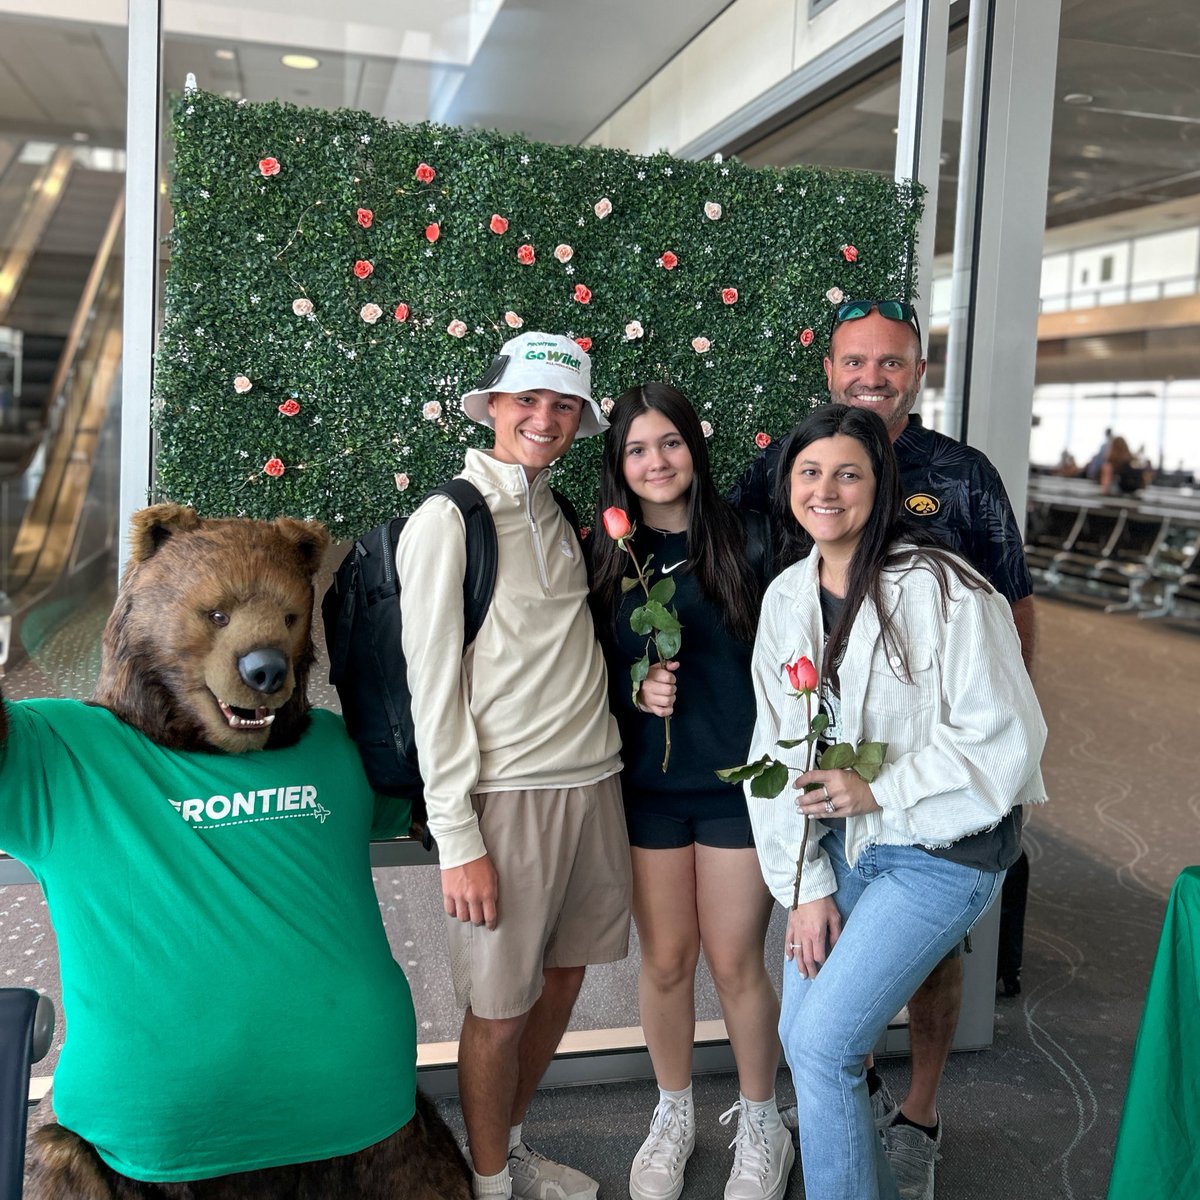 Everyone deserves flowers (especially your mom)! 🌷 Last week, our marketing team spread love at @DENAirport for Mother's Day, giving out flights, flowers, and goodies. Give your mom the gift of travel and flowers this year! Enter our giveaway for a chance to win a trip for…